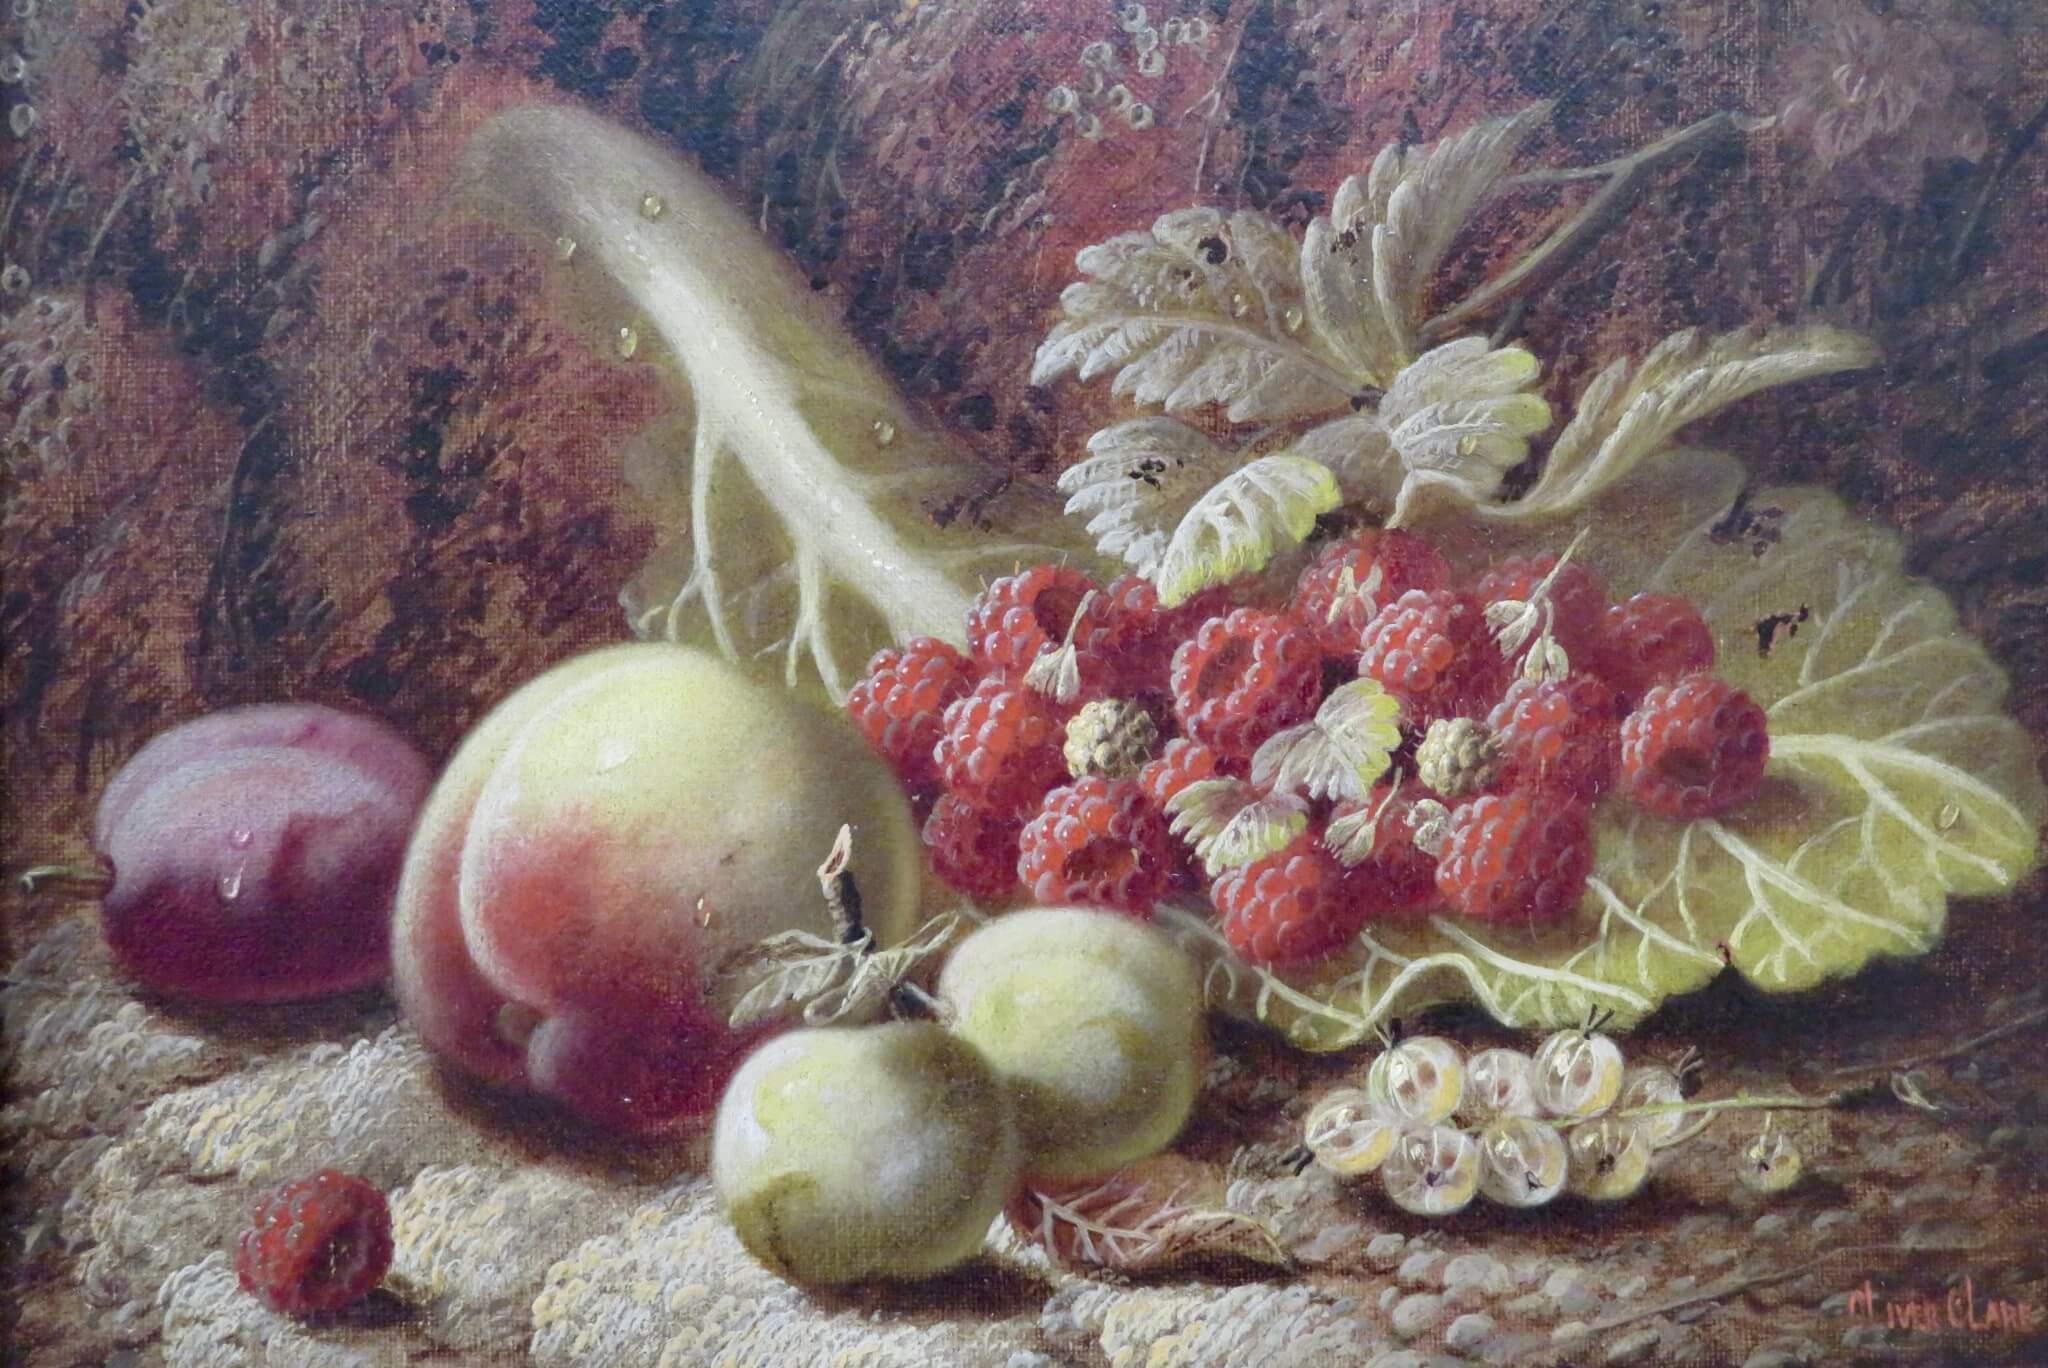 English 19th Century Antique Oil On Canvas Still Life Fruit On A Mossy Bank  - Painting by Oliver Clare